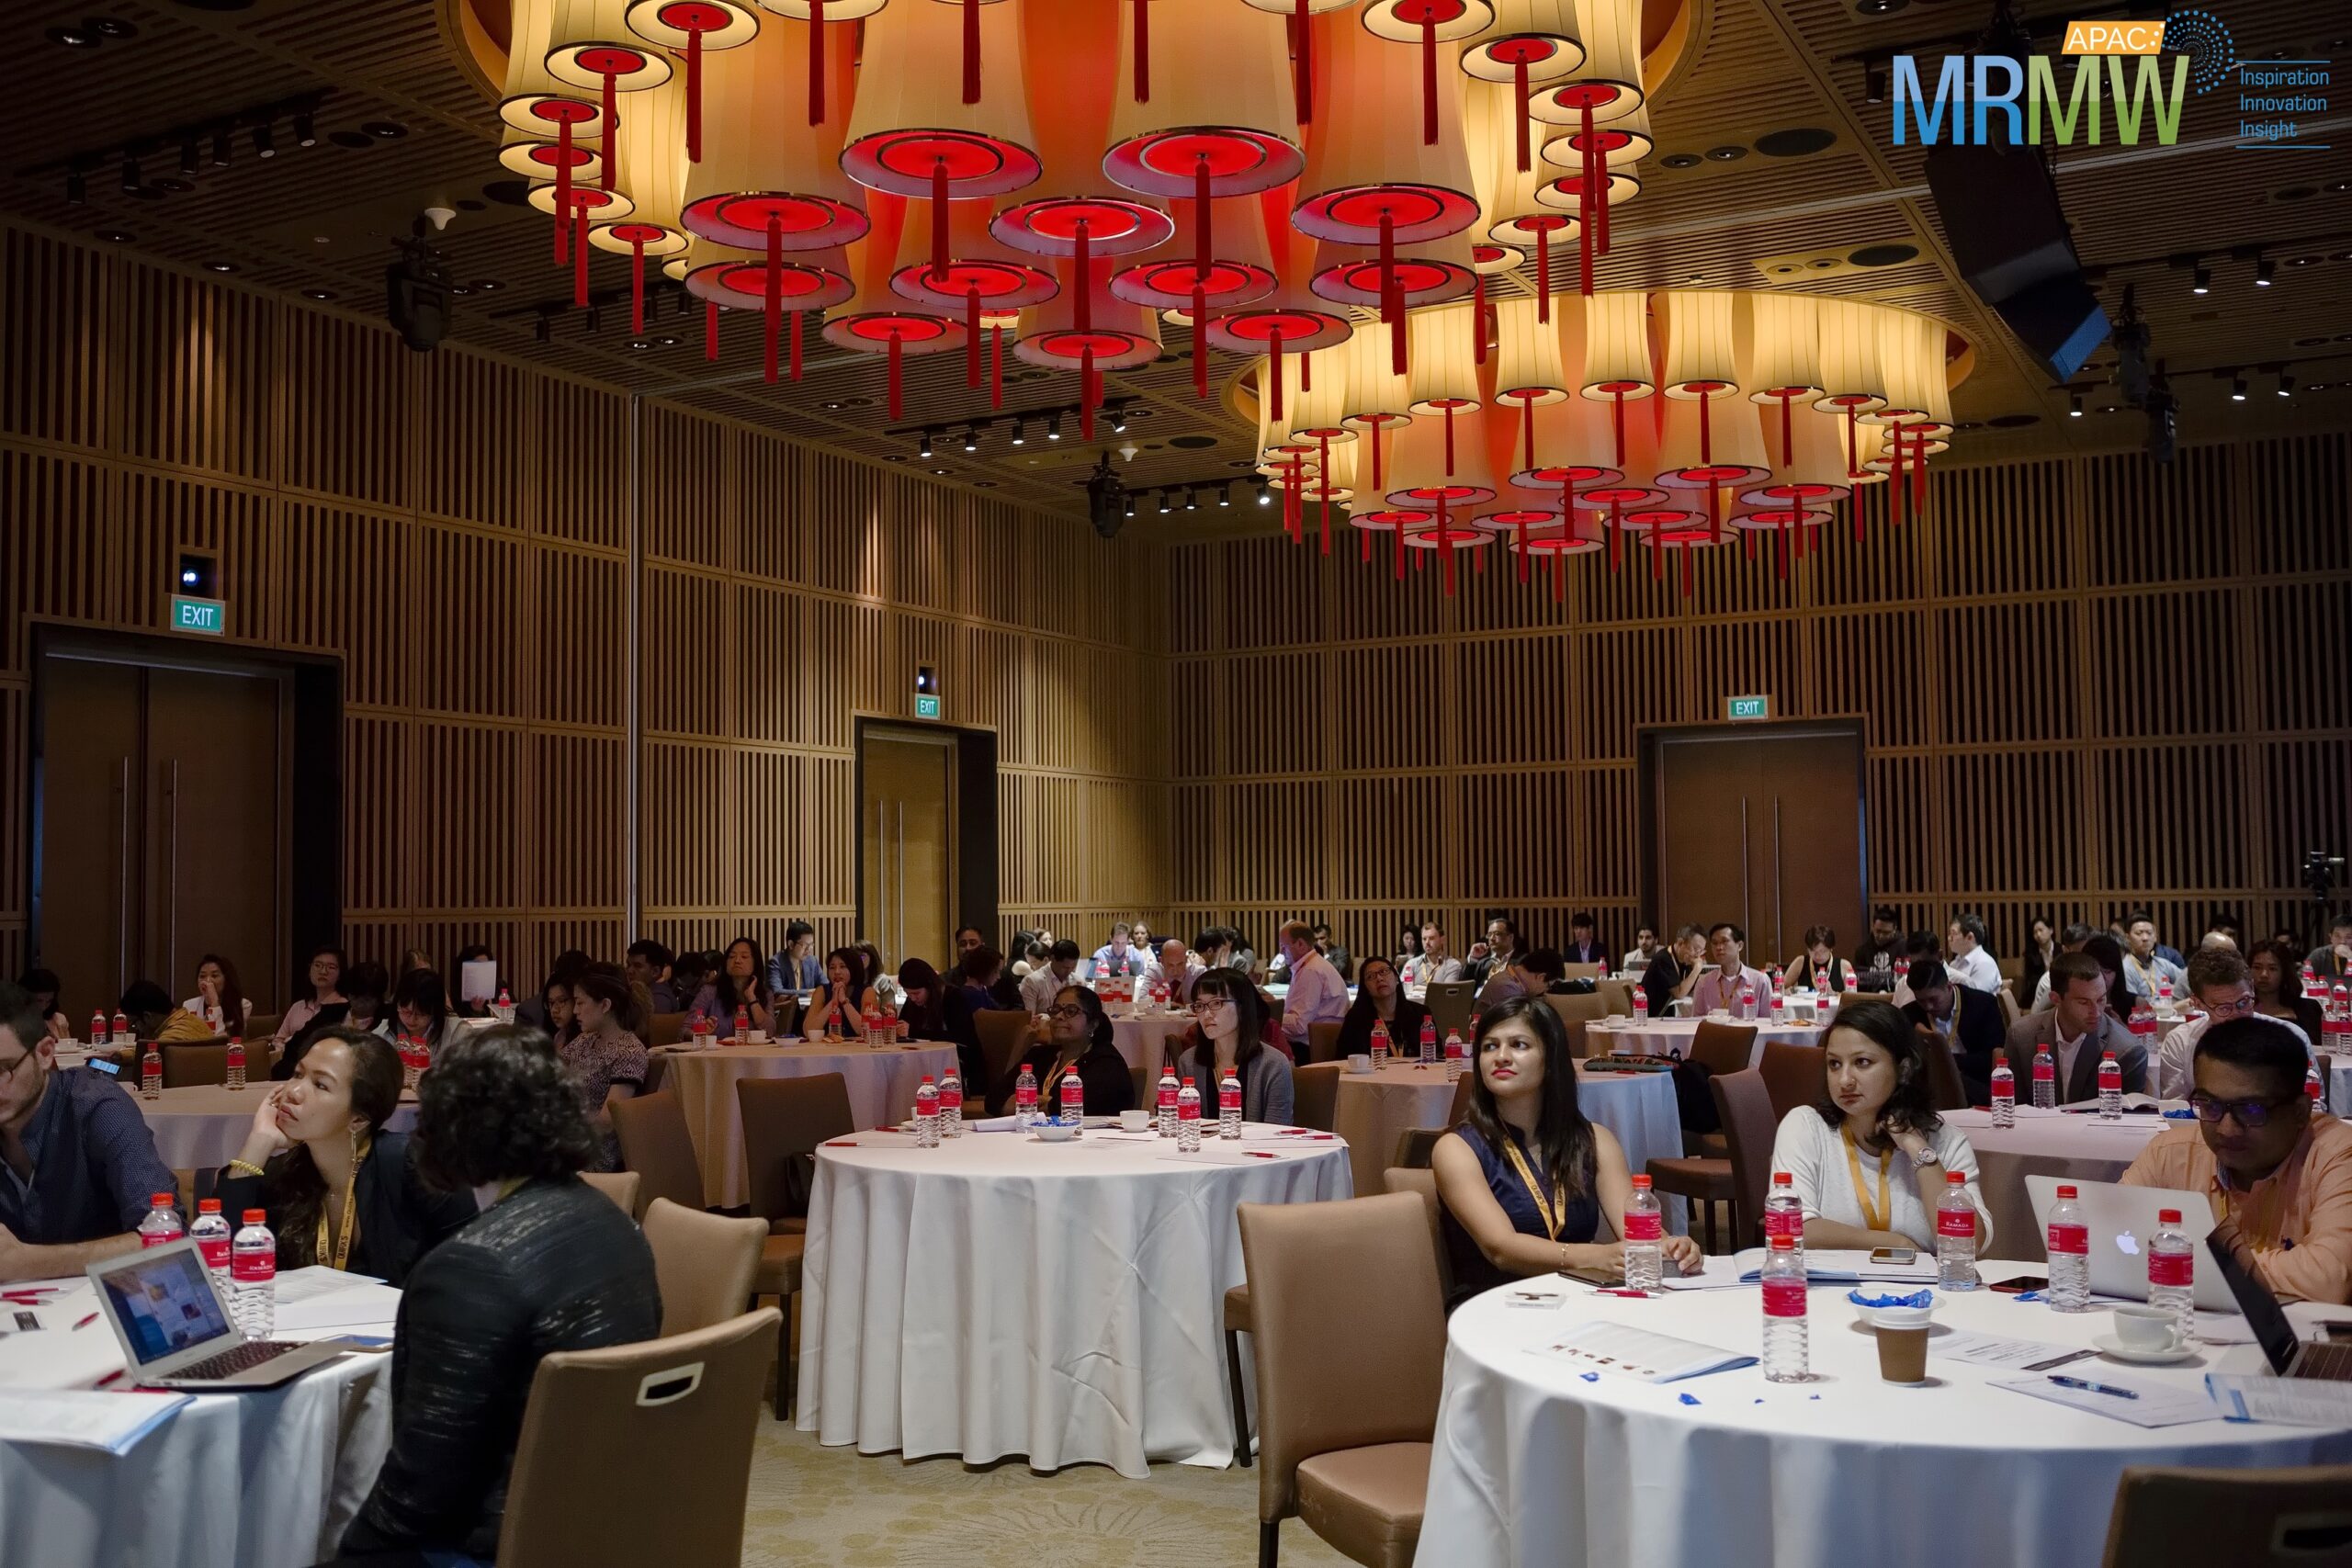 Q&A with Ipsos, Kantar Insights and Lightspeed for MRMW APAC 2019